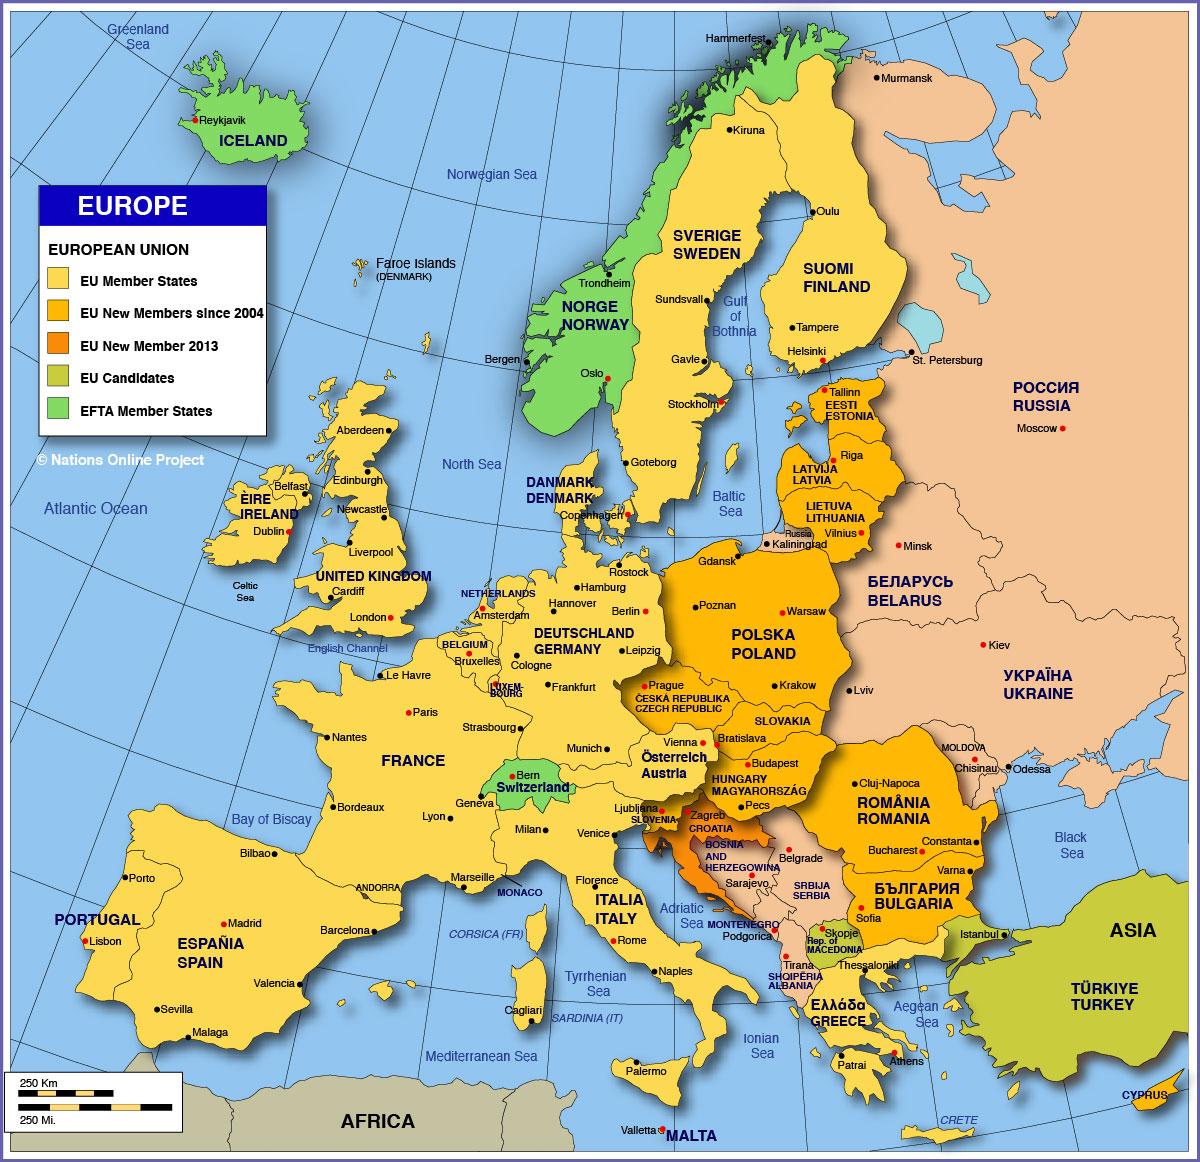 Moscow europe map - Moscow on map of europe (Russia)